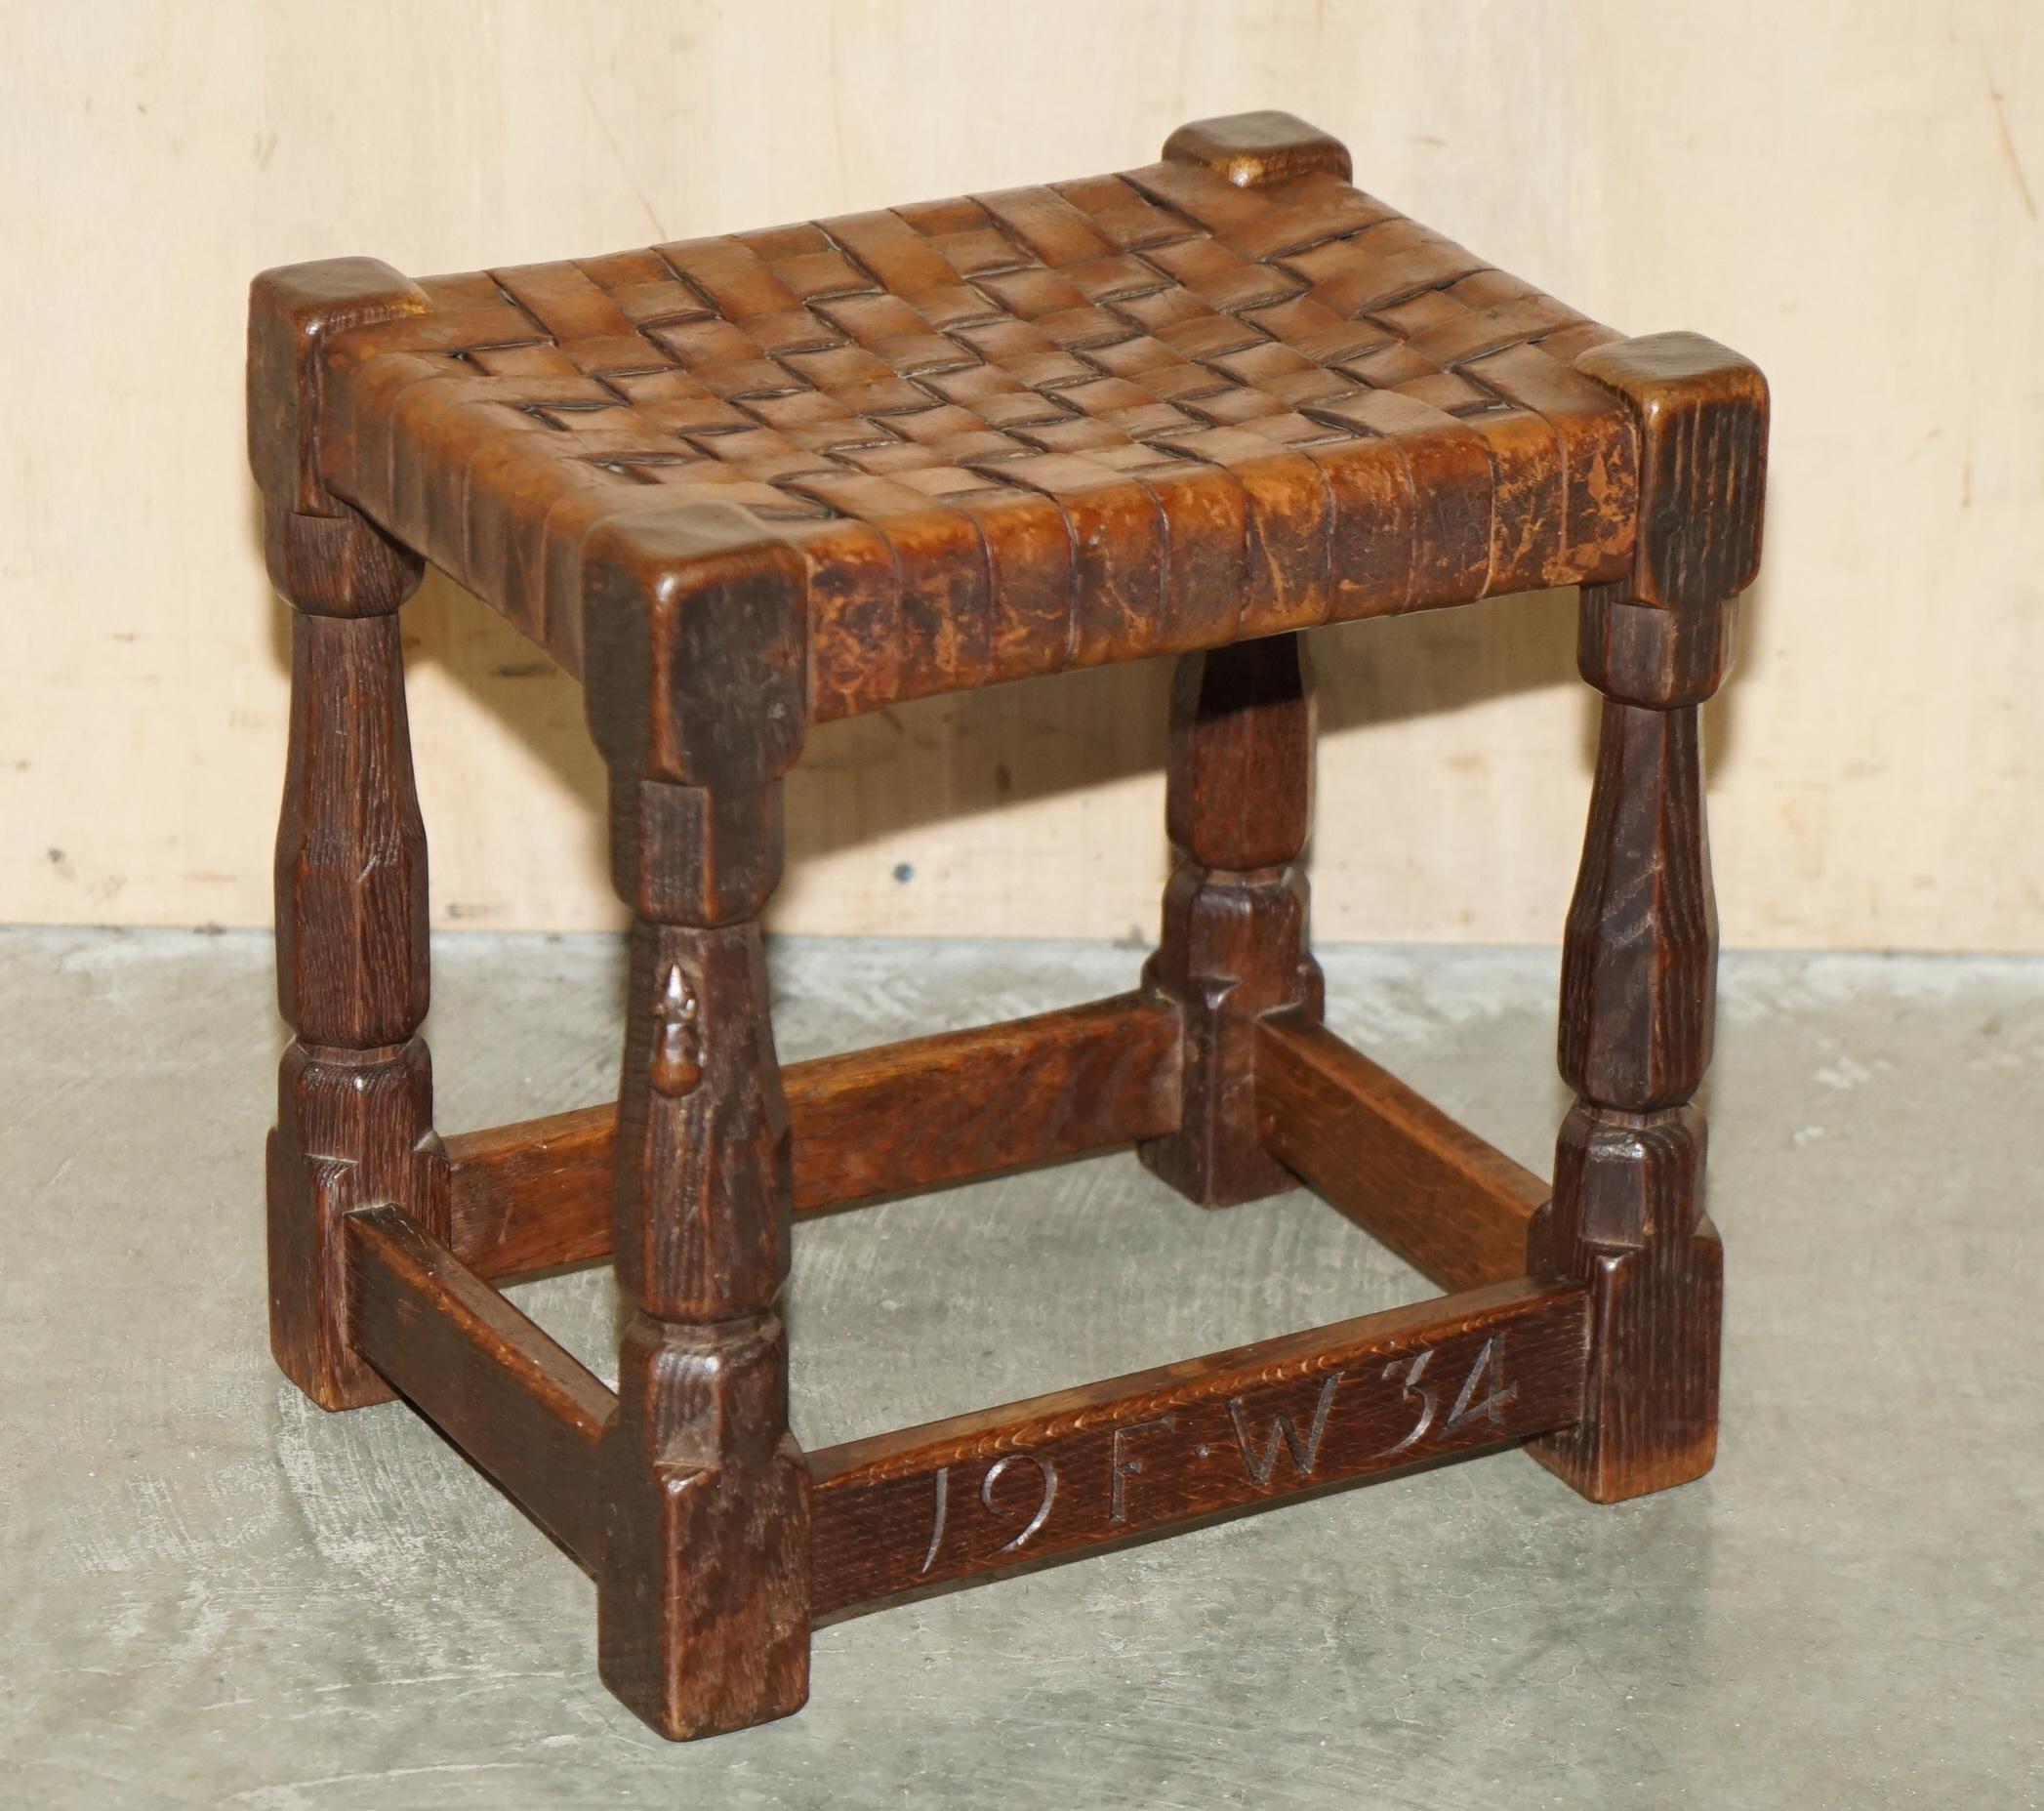 Royal House Antiques

Royal House Antiques is delighted to offer for sale this stunning 1934 dated Robert Mouseman Thompson leather woven footstool in sublime period condition

A good looking and functional small footstool, the ideal size for one